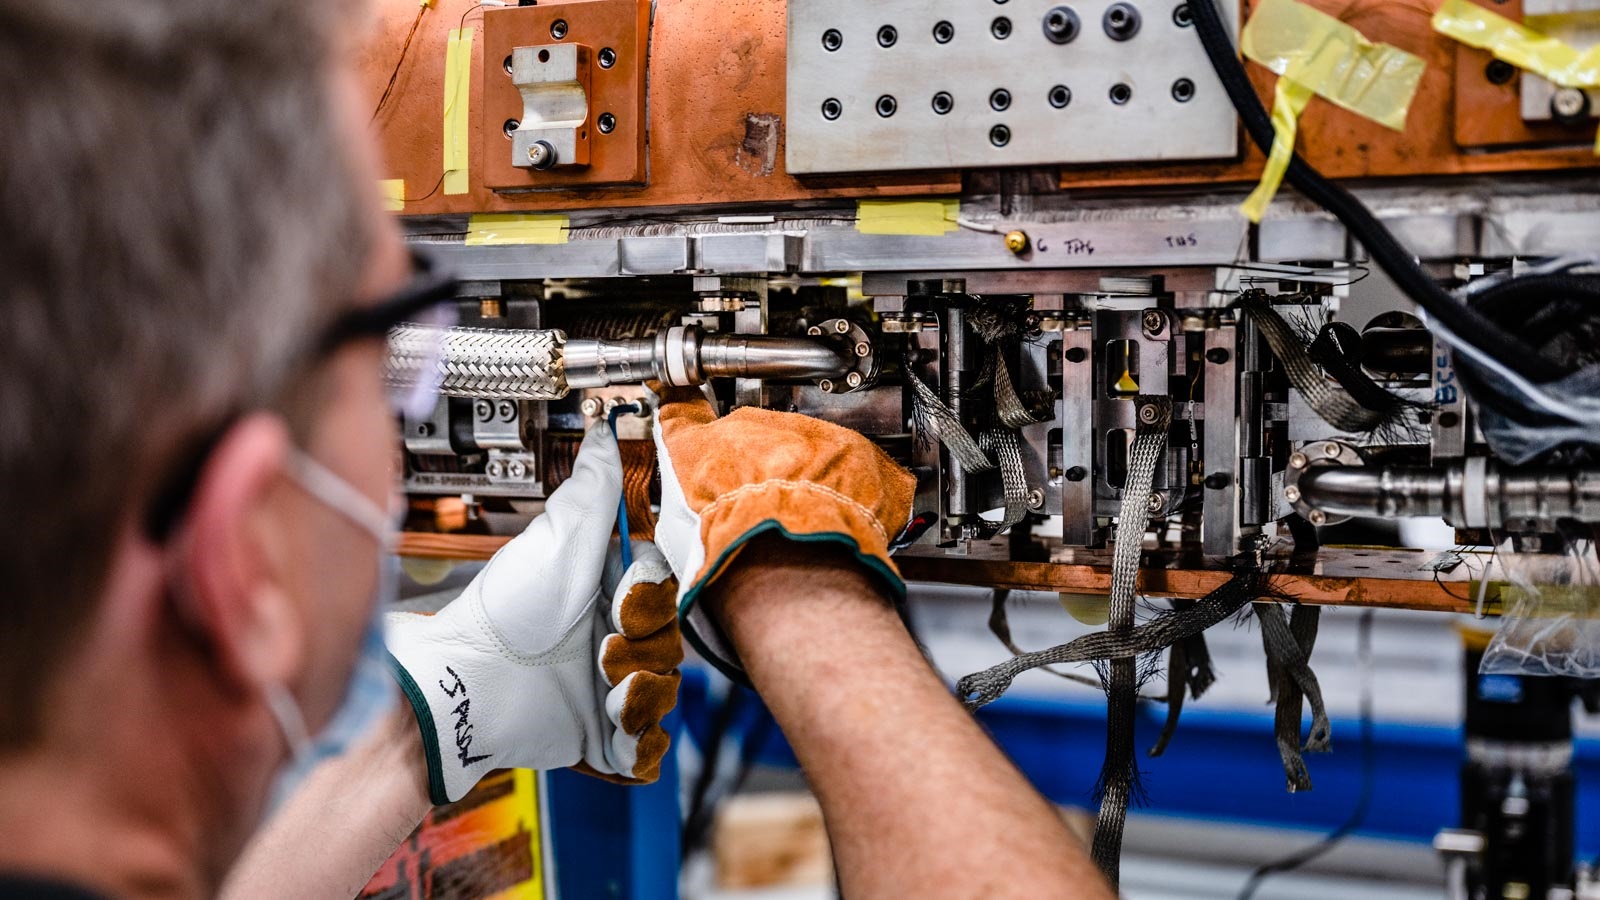 View from behind, man's arms and gloved hands working on equipment. (Image by Jason Creps/Argonne National Laboratory.)